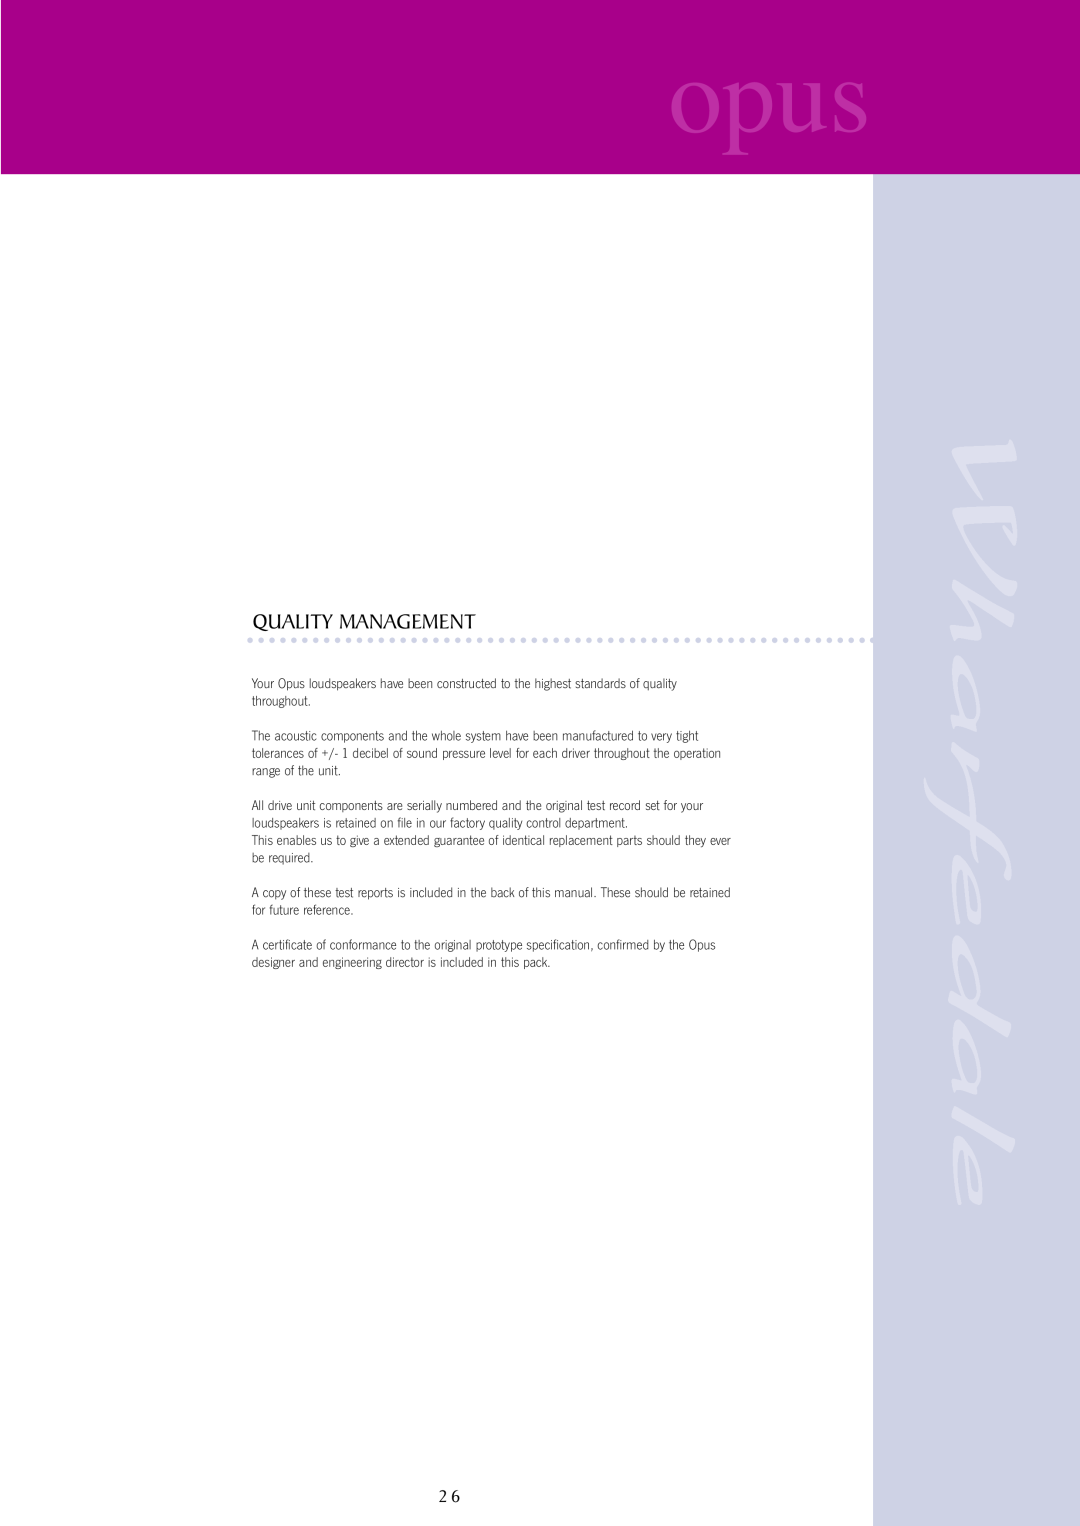 Wharfedale opus user manual Quality Management 